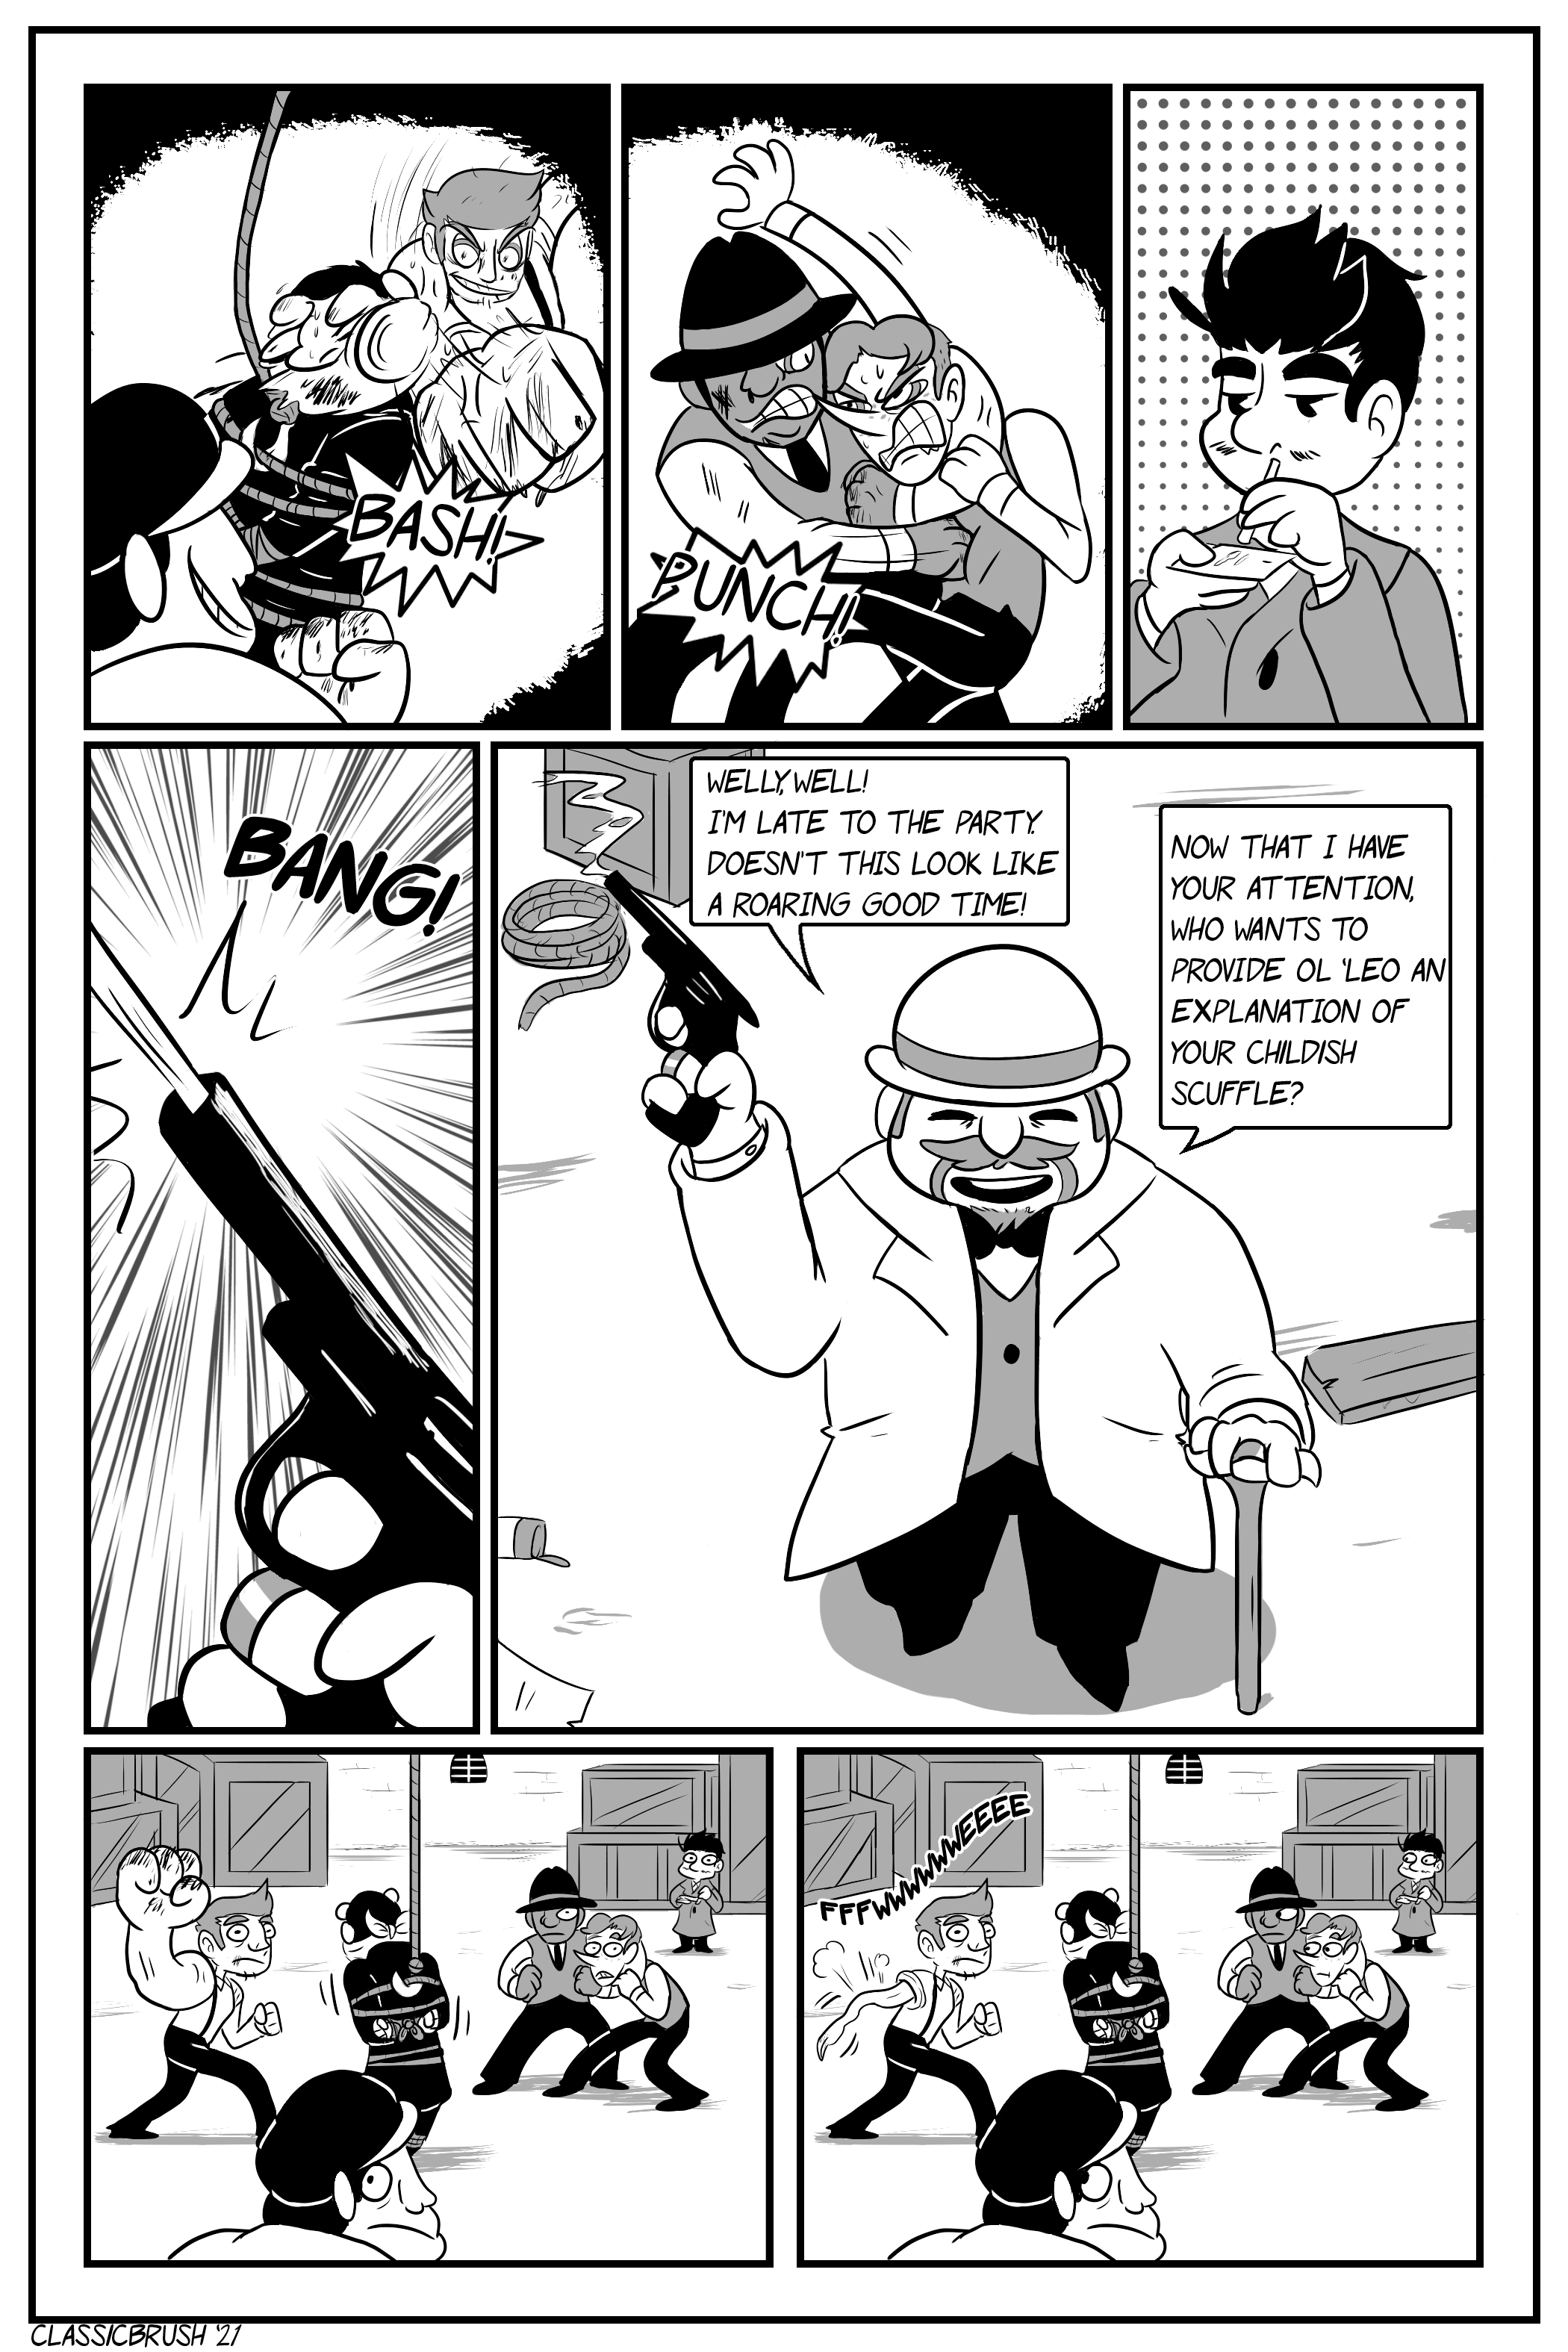 Panel 1: Jack and Marco continue assaulting the officer. Panel 2: Harrison and Ozzy are in a tussle, with Ozzy punching Harrison in the stomach. Panel 3: A lone Jonny takes the opportunity to snort drugs. Panel 4: A revolver is seen firing a bullet to the sky. Panel 5: And rotund, well dressed man with a smile appears, revolver in hand. â€œWelly, well! Iâ€™m late to the party. Doesnâ€™t this look like a roaring good time!â€ â€œNow that I have your attention, who wants to provide olâ€™Leo an explanation for your childish scuffle?â€ Panel 6: All the men halt their actions, frozen and silent. Panel 7: All the men are still standing in place with the exception of Jack, whose enlarged arm deflates with a comical â€œfffwwwwwweeeeâ€ as the other menâ€™s eyes shift to him.